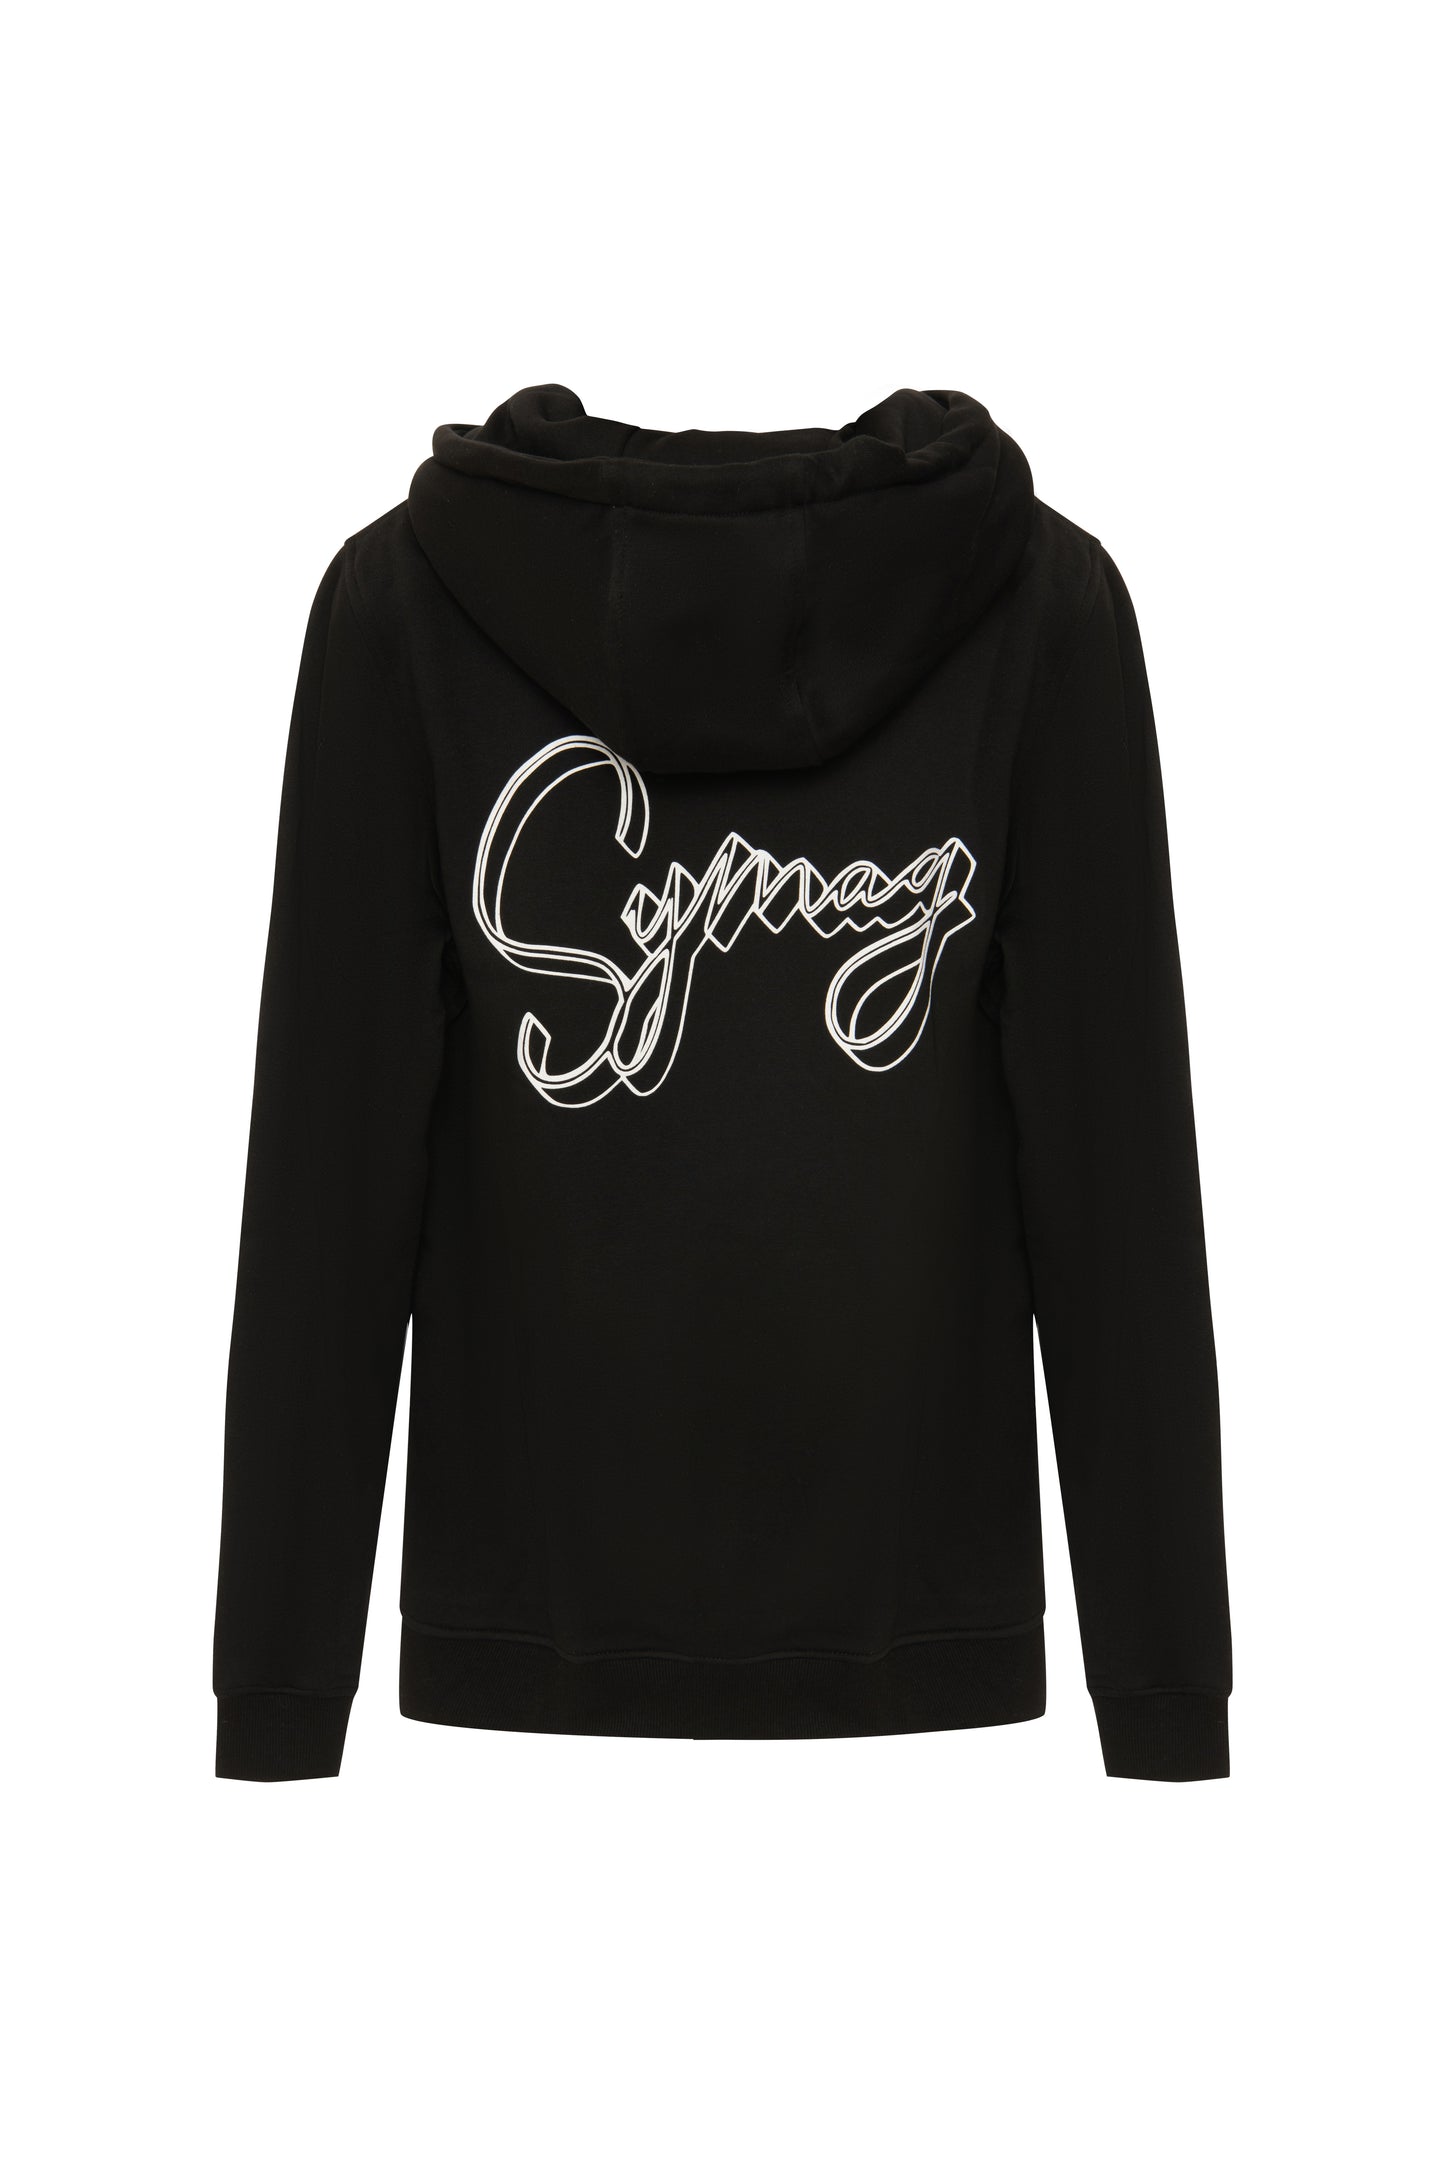 Hoodie SG Front Logo - Symag on the back (Vinyl Printing)